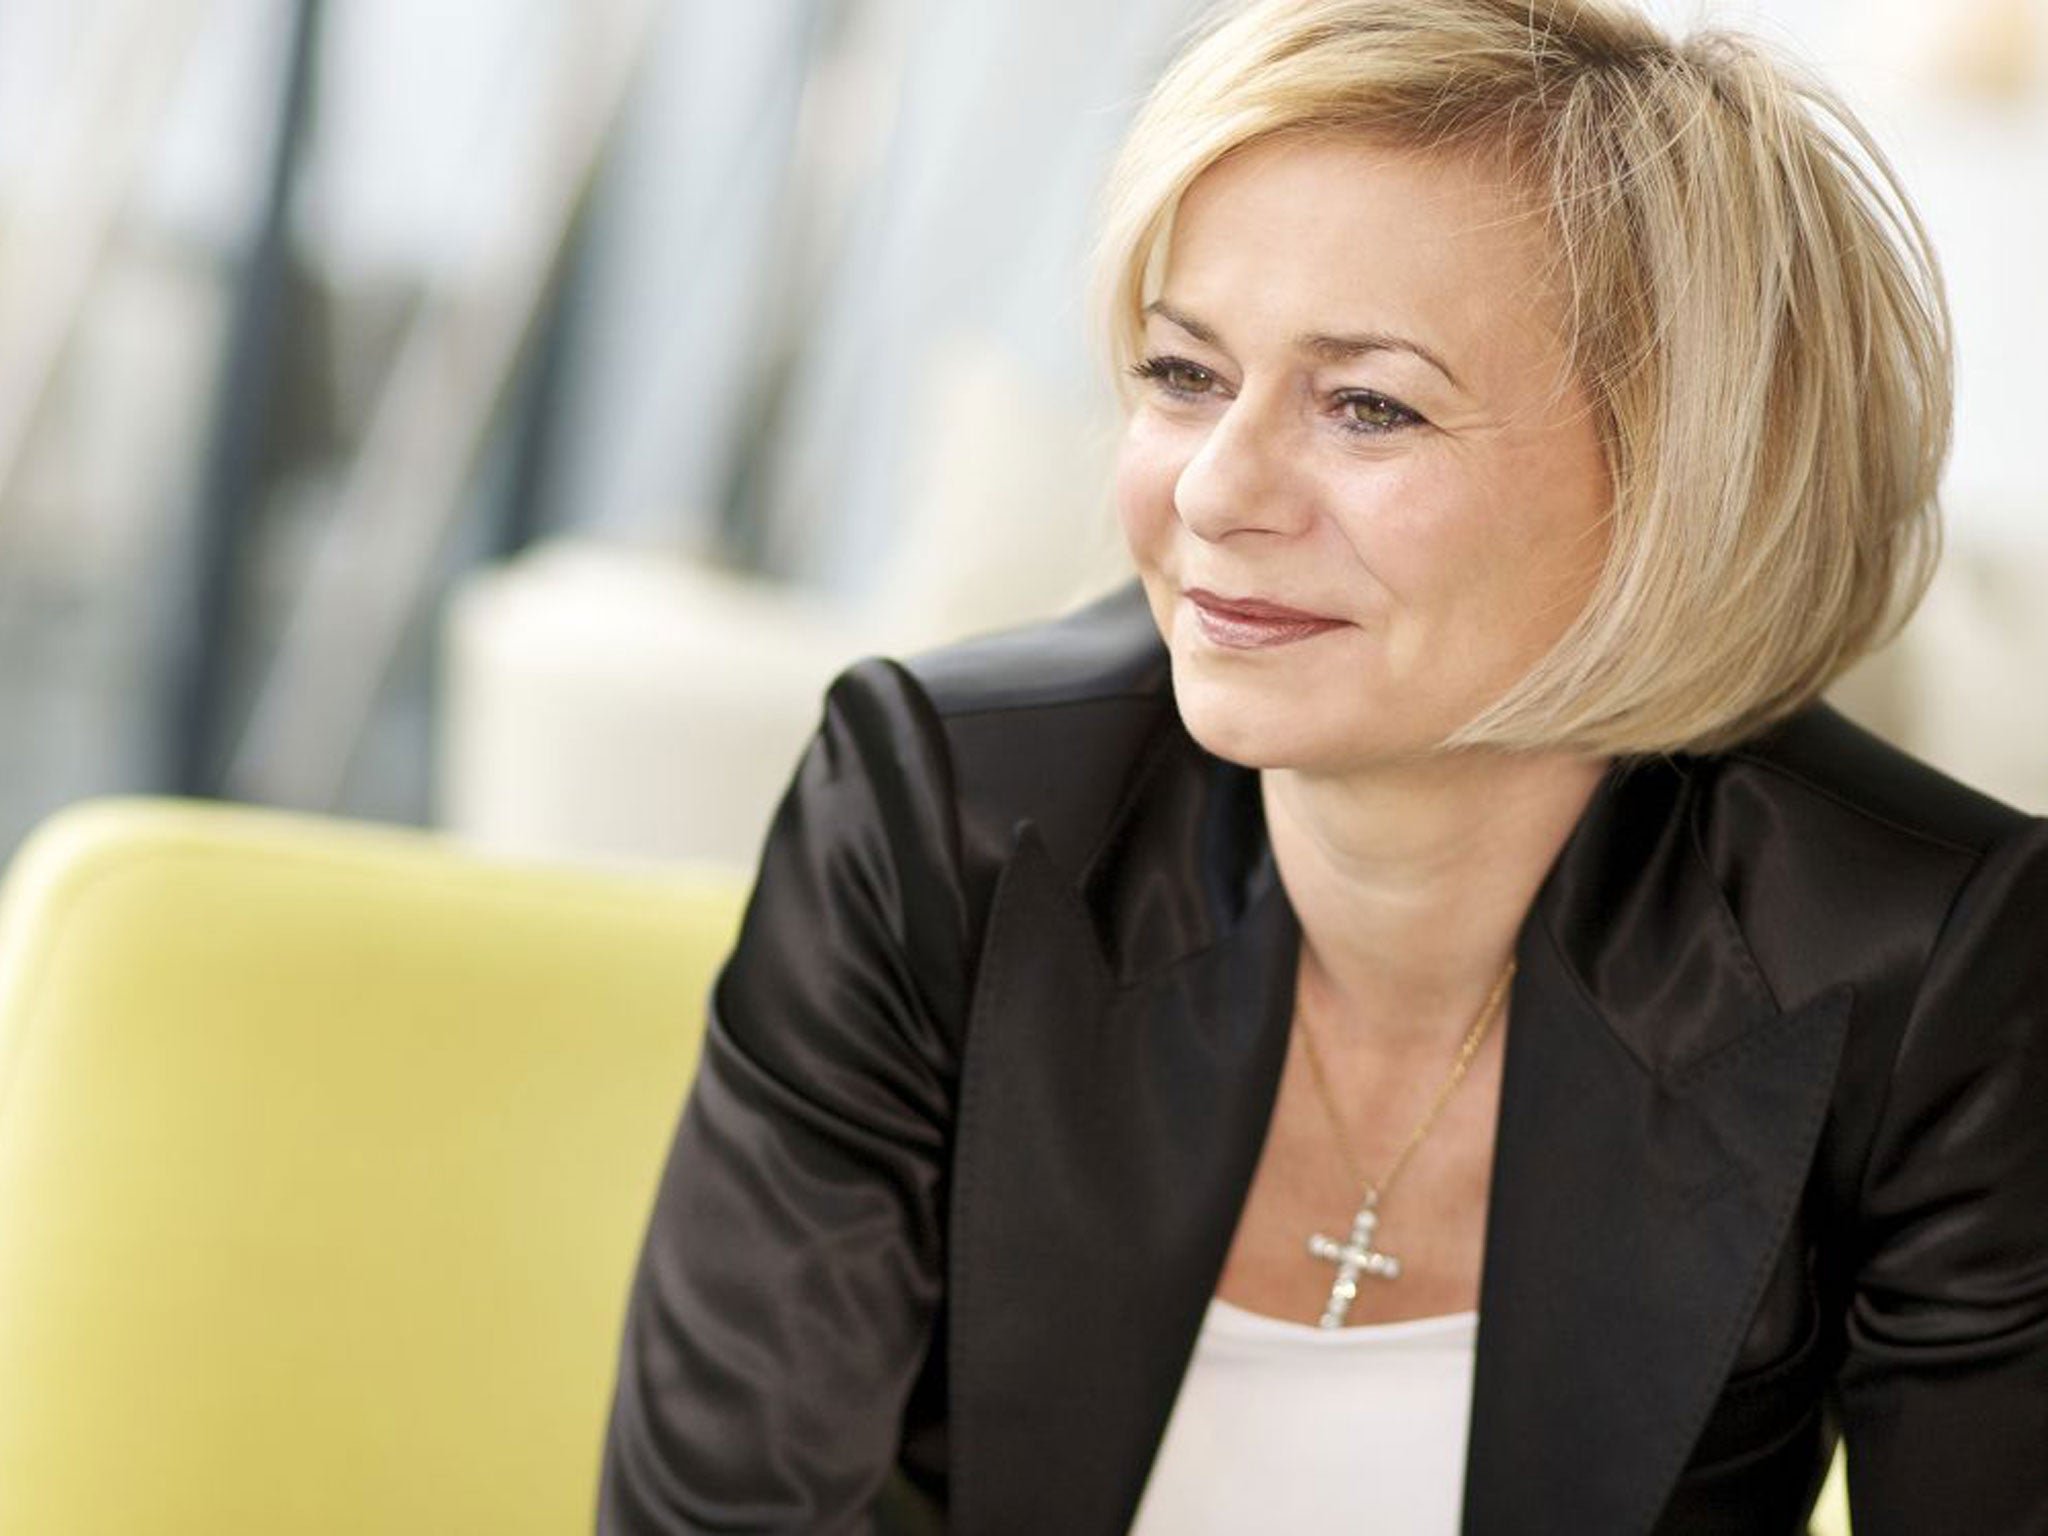 Thomas Cook’s chief executive Harriet Green: “I felt I would be pacy, resilient and able to generate belief in the company”